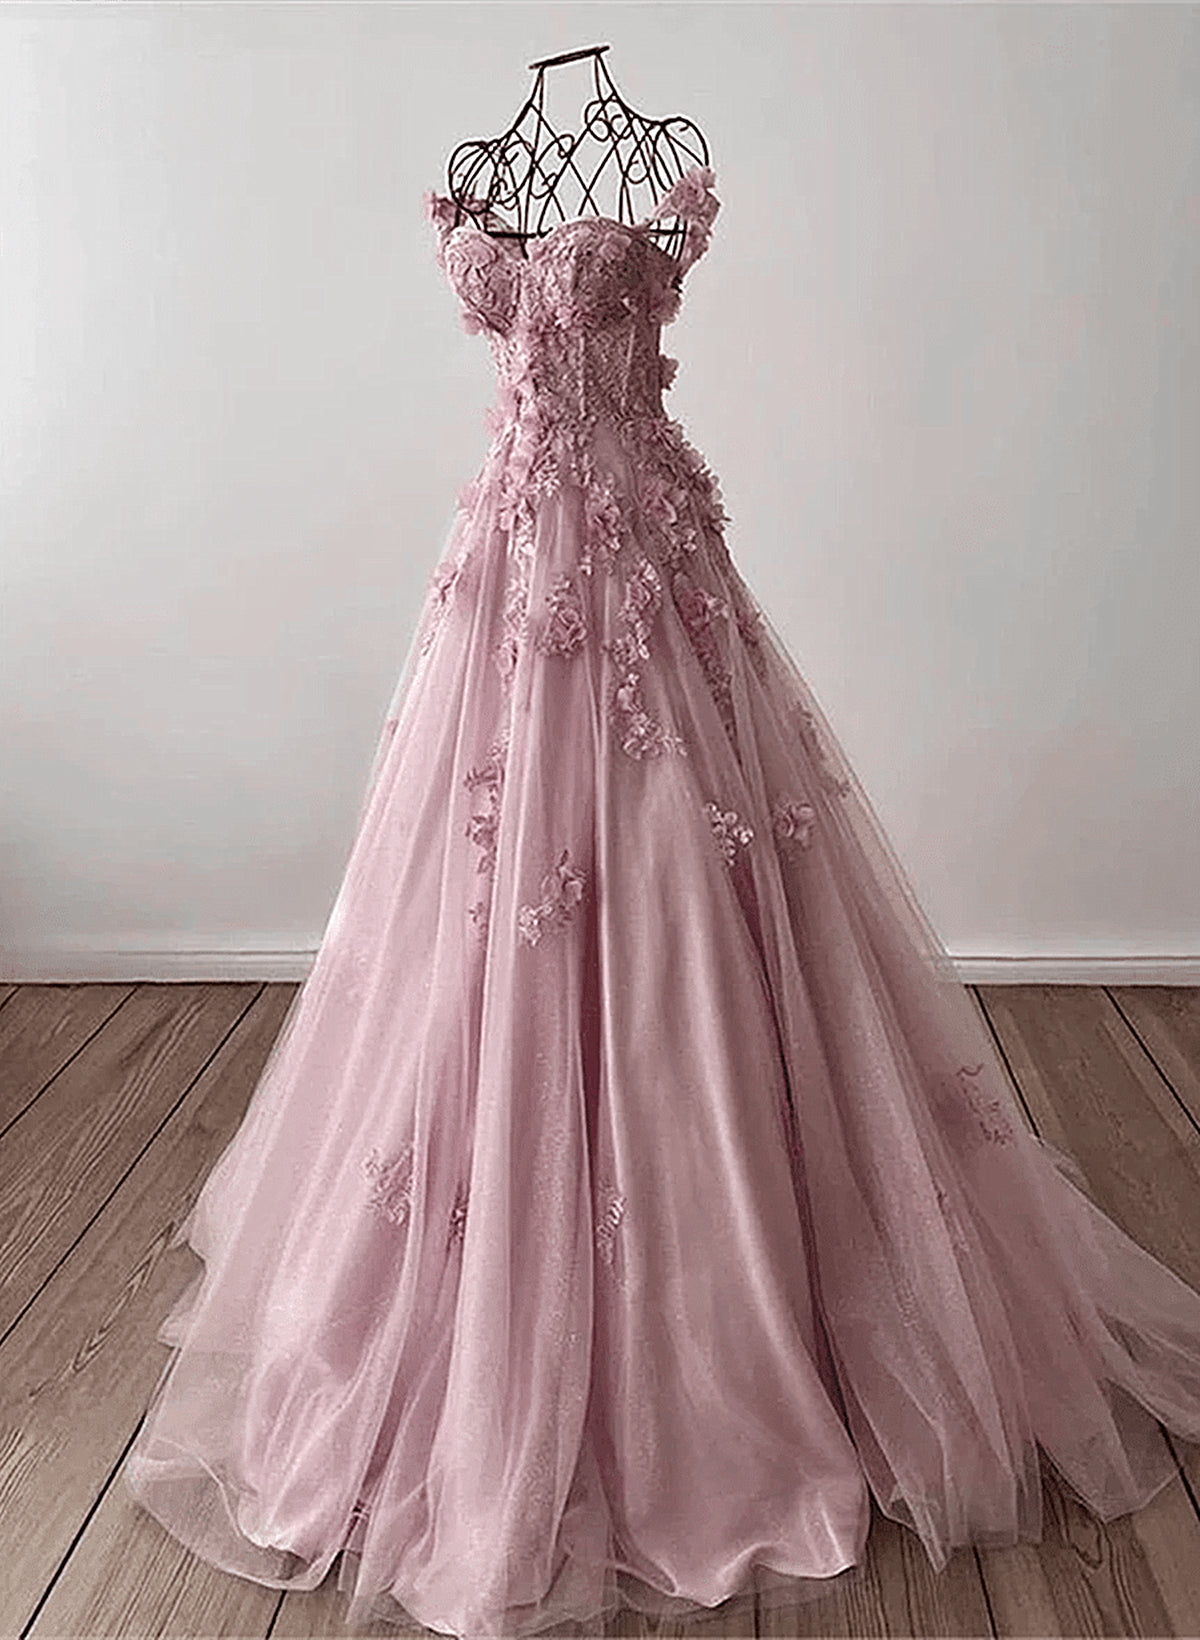 Light Pink Off Shoulder Tulle Floral Party Dress Outfits For Girls, A-line Pink Tulle Prom Dress Outfits For Women Evening Dress